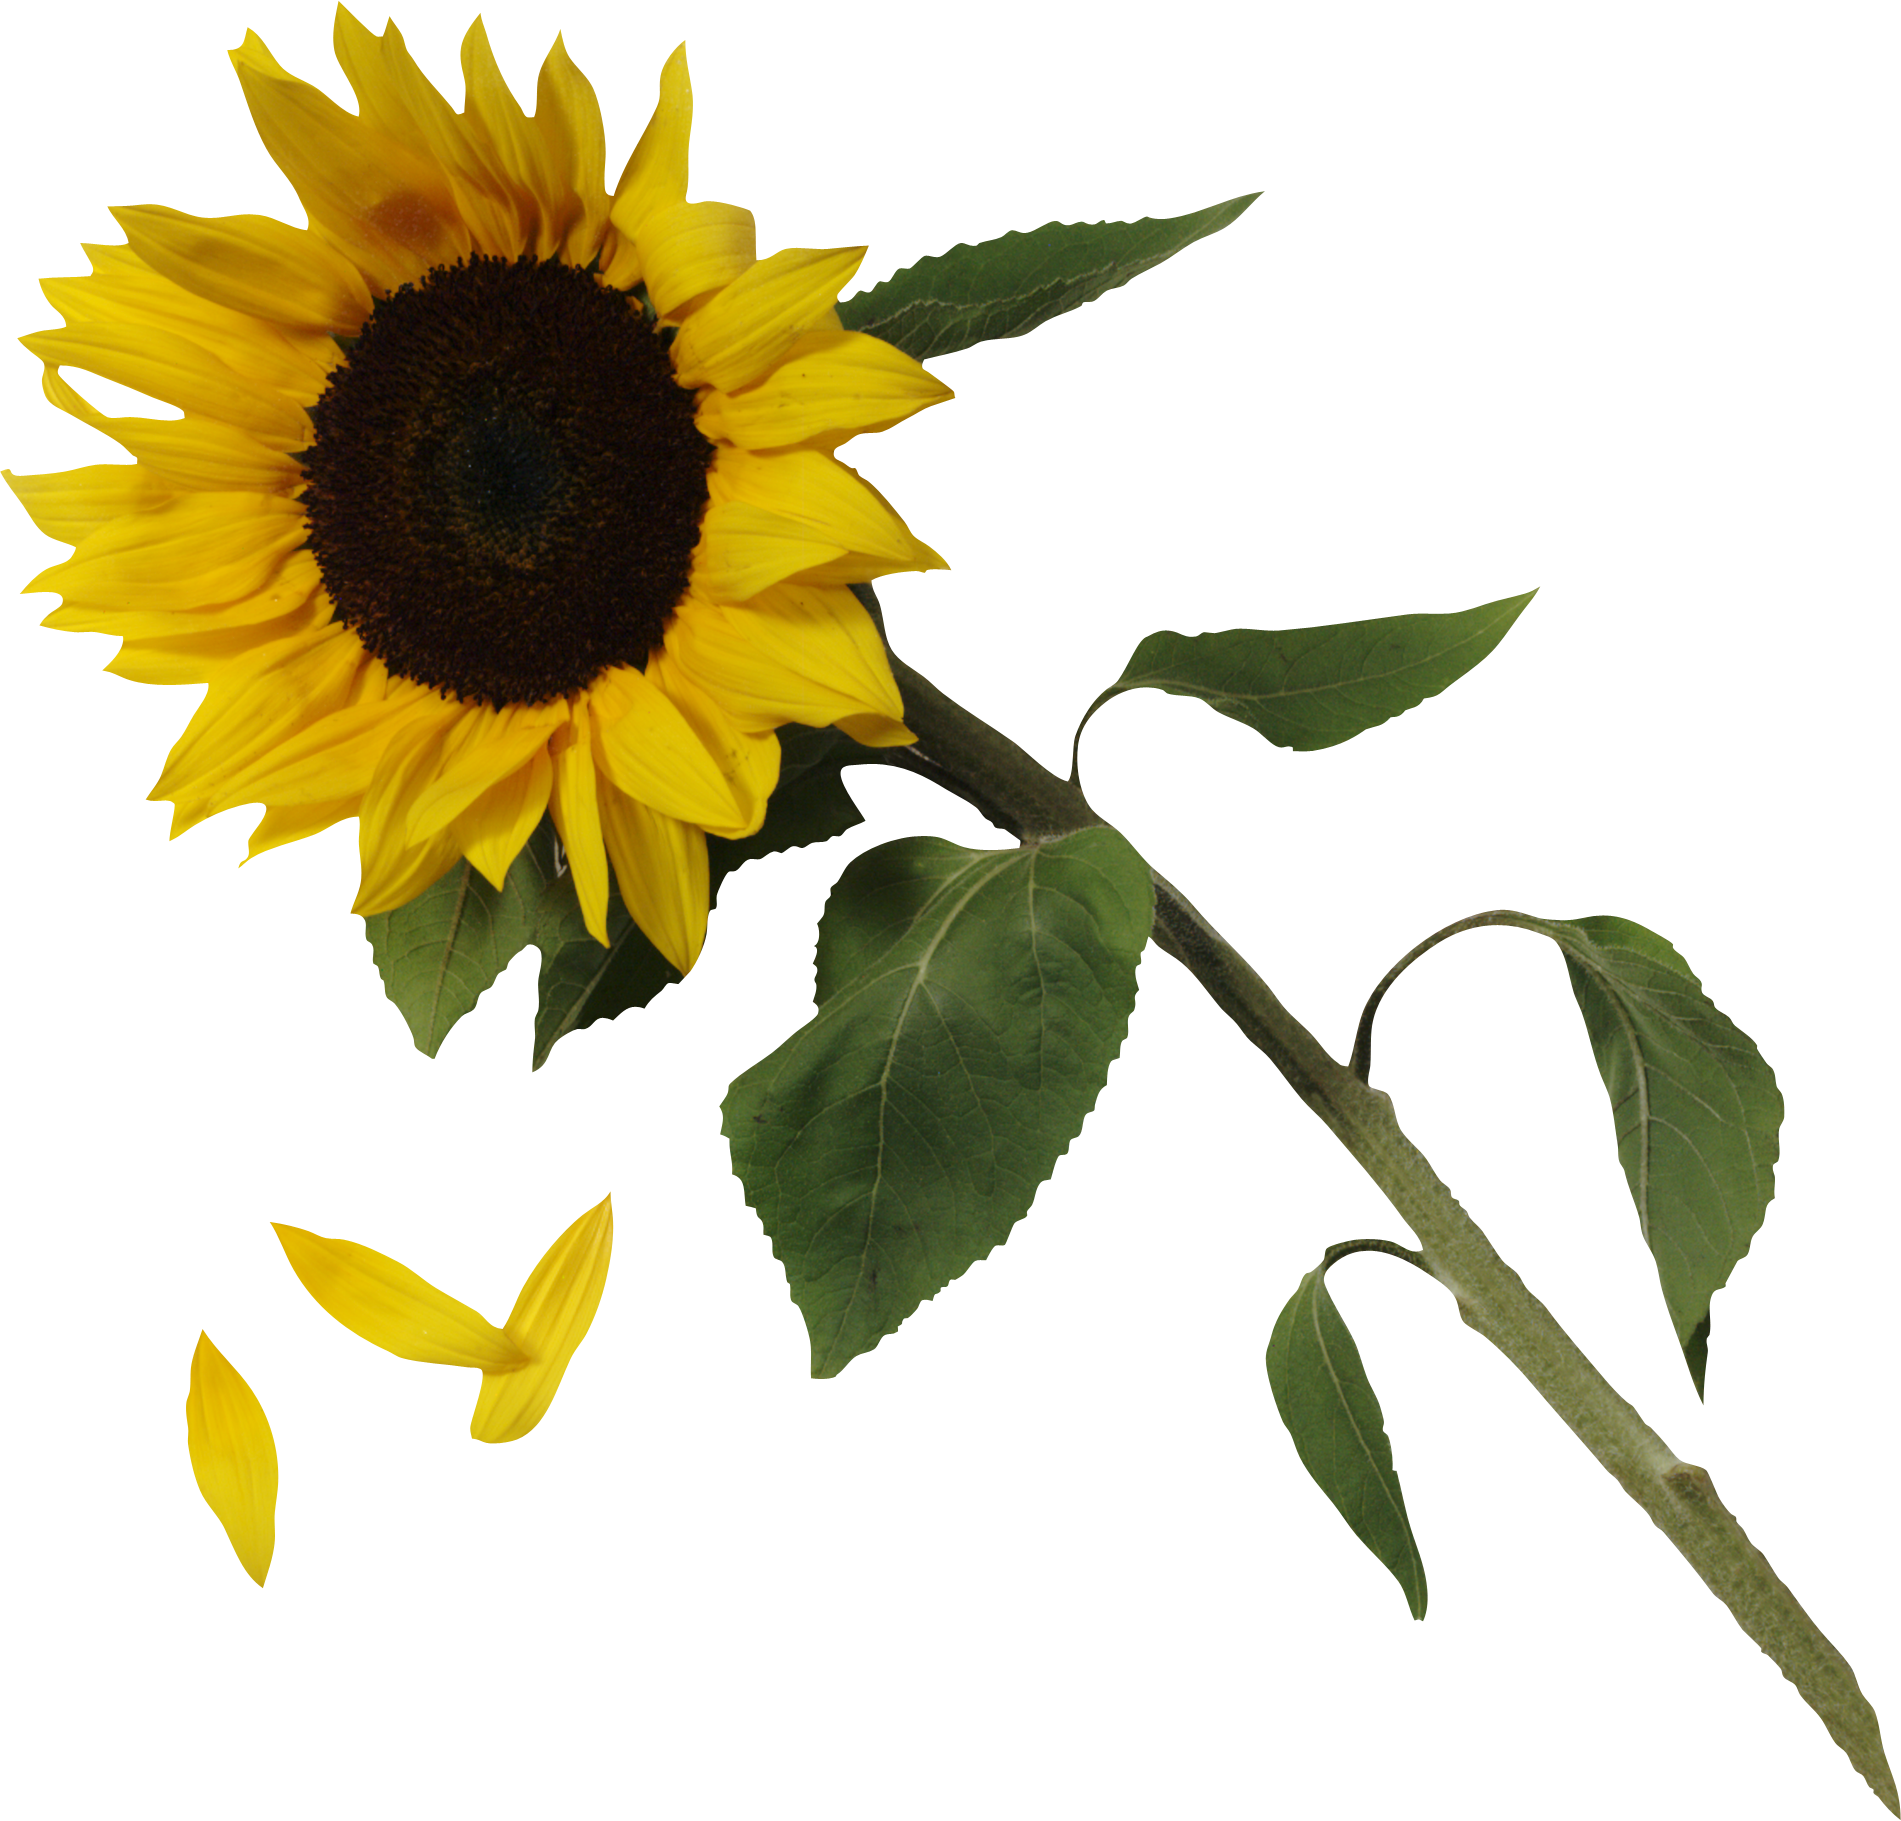 Sunflower Image Png Image - Sunflower Png (1901x1821)